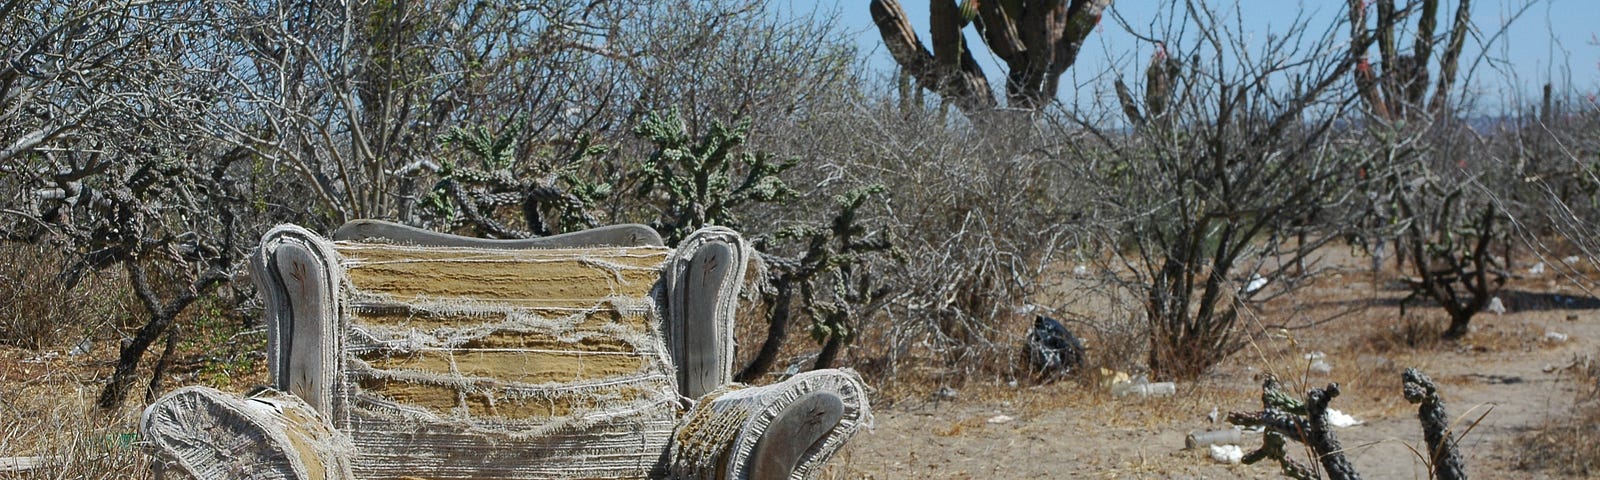 A decaying chair surrounded by cacti, twigs. The environment is desert-like.